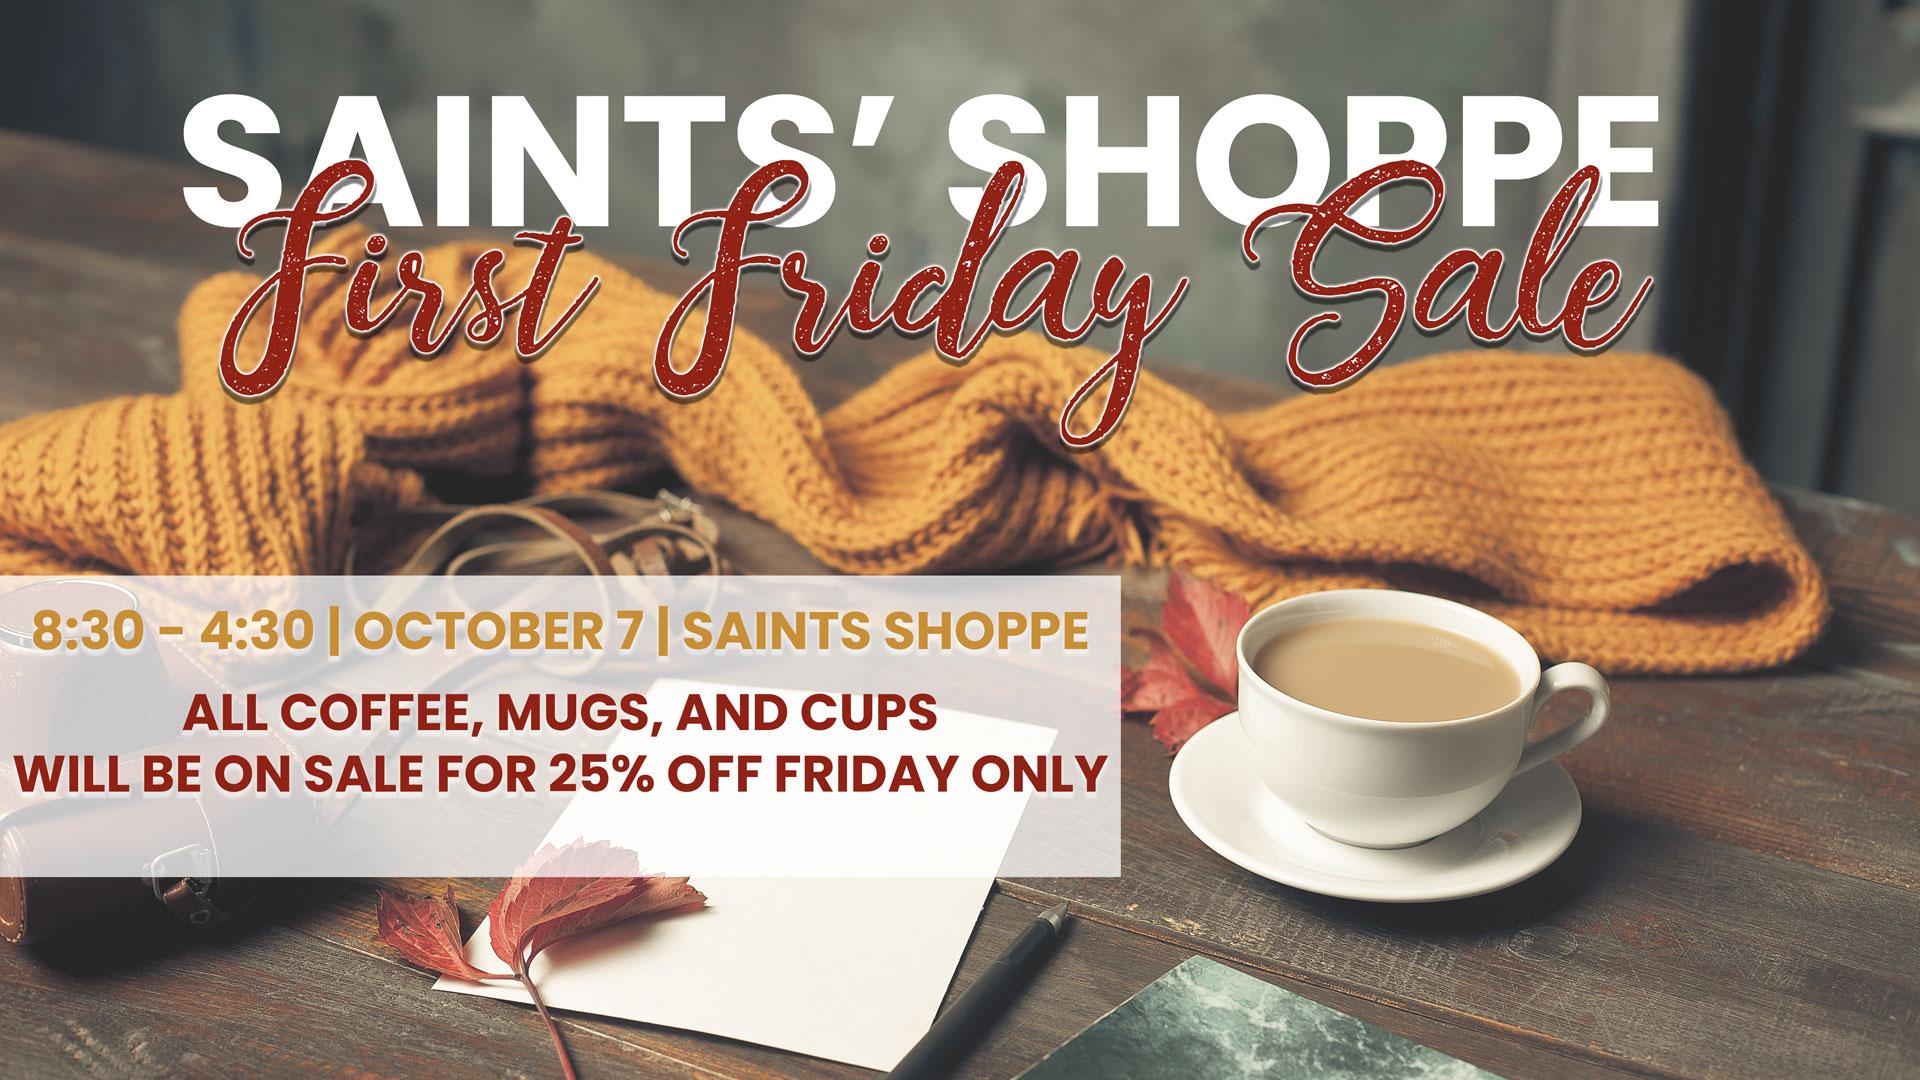 Saints' Shoppe First Friday Sale October